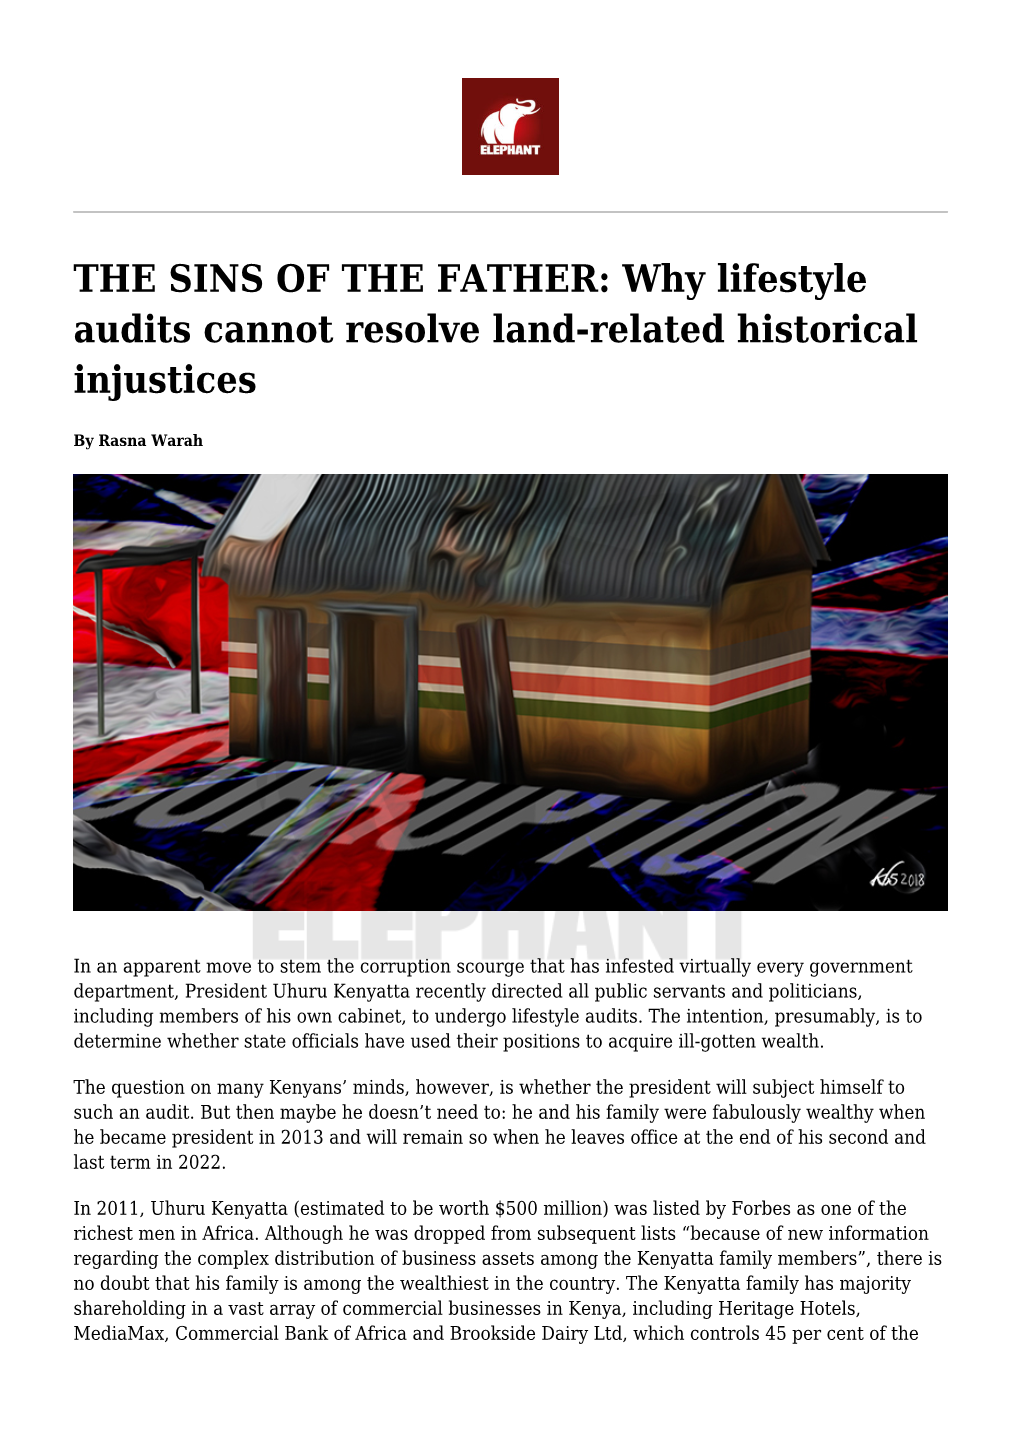 THE SINS of the FATHER: Why Lifestyle Audits Cannot Resolve Land-Related Historical Injustices